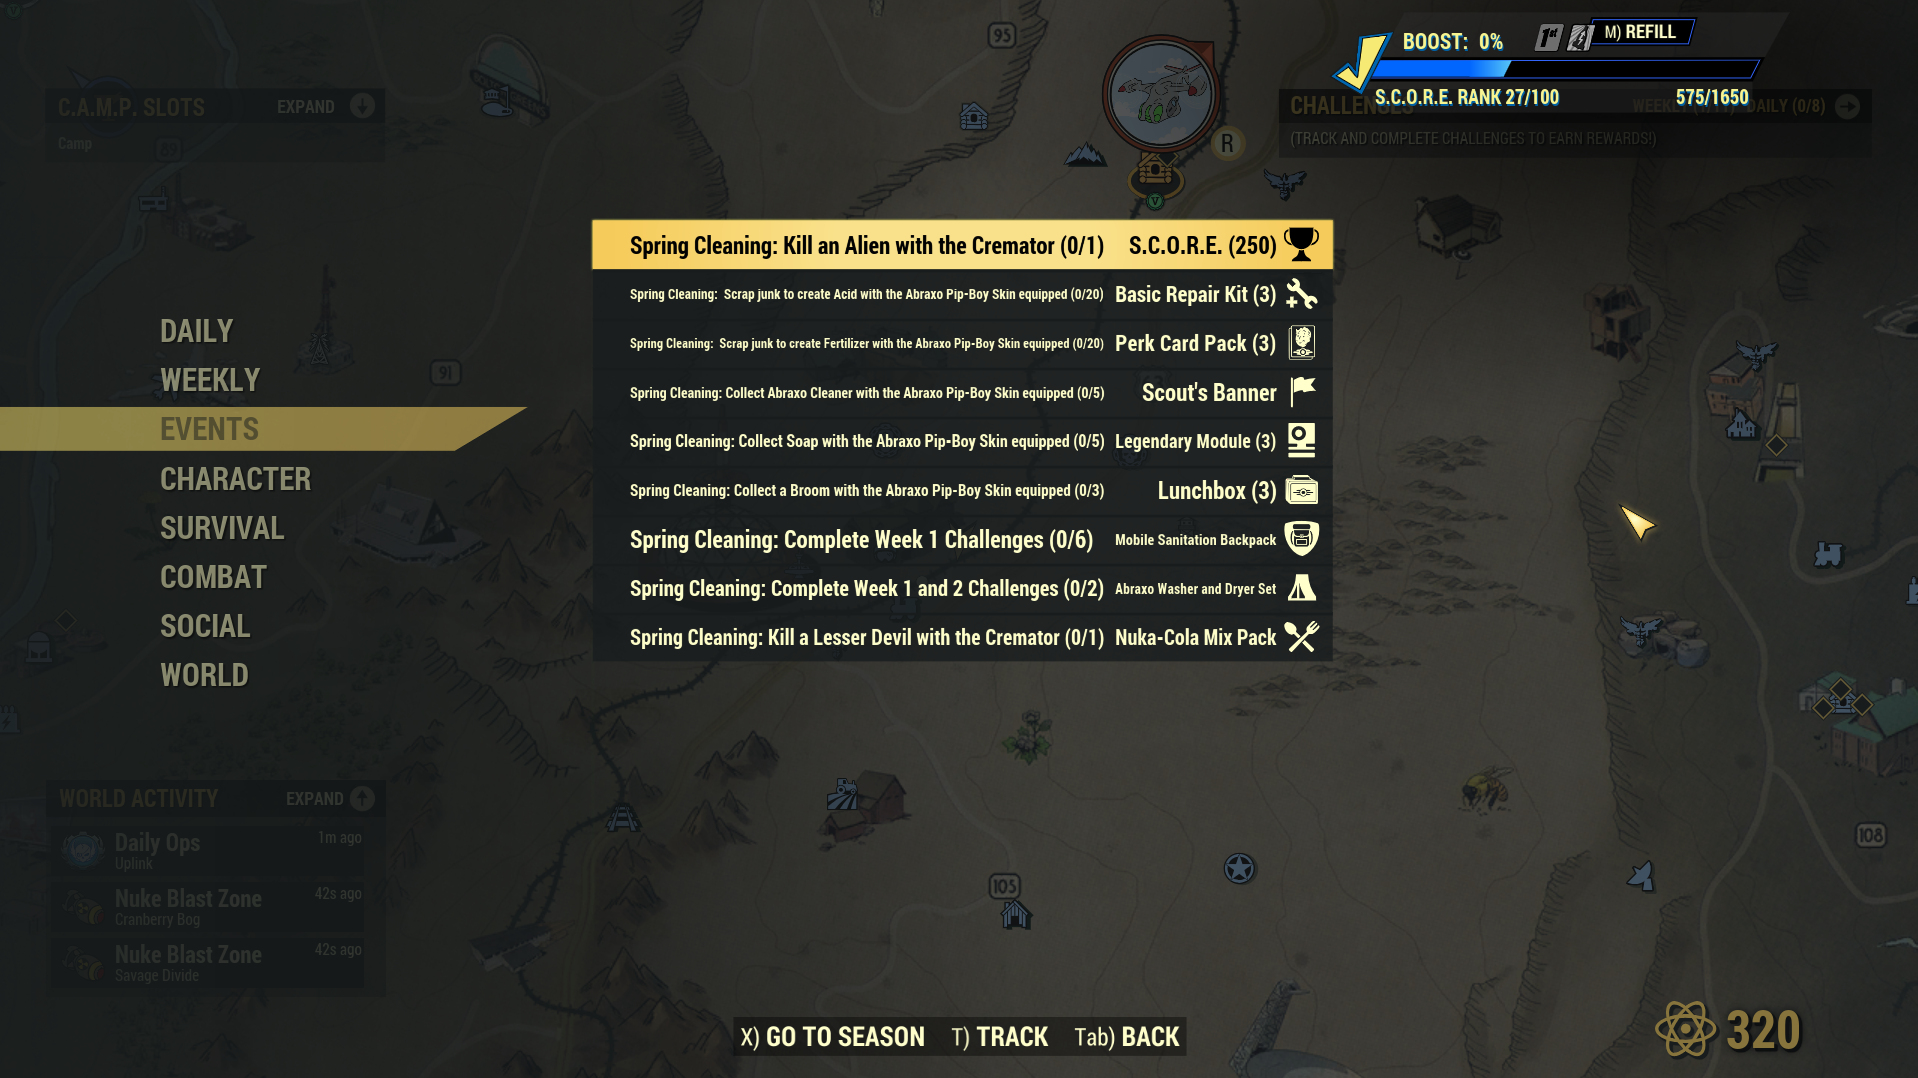 Spring Cleaning Week 1 challenges in Fallout 76